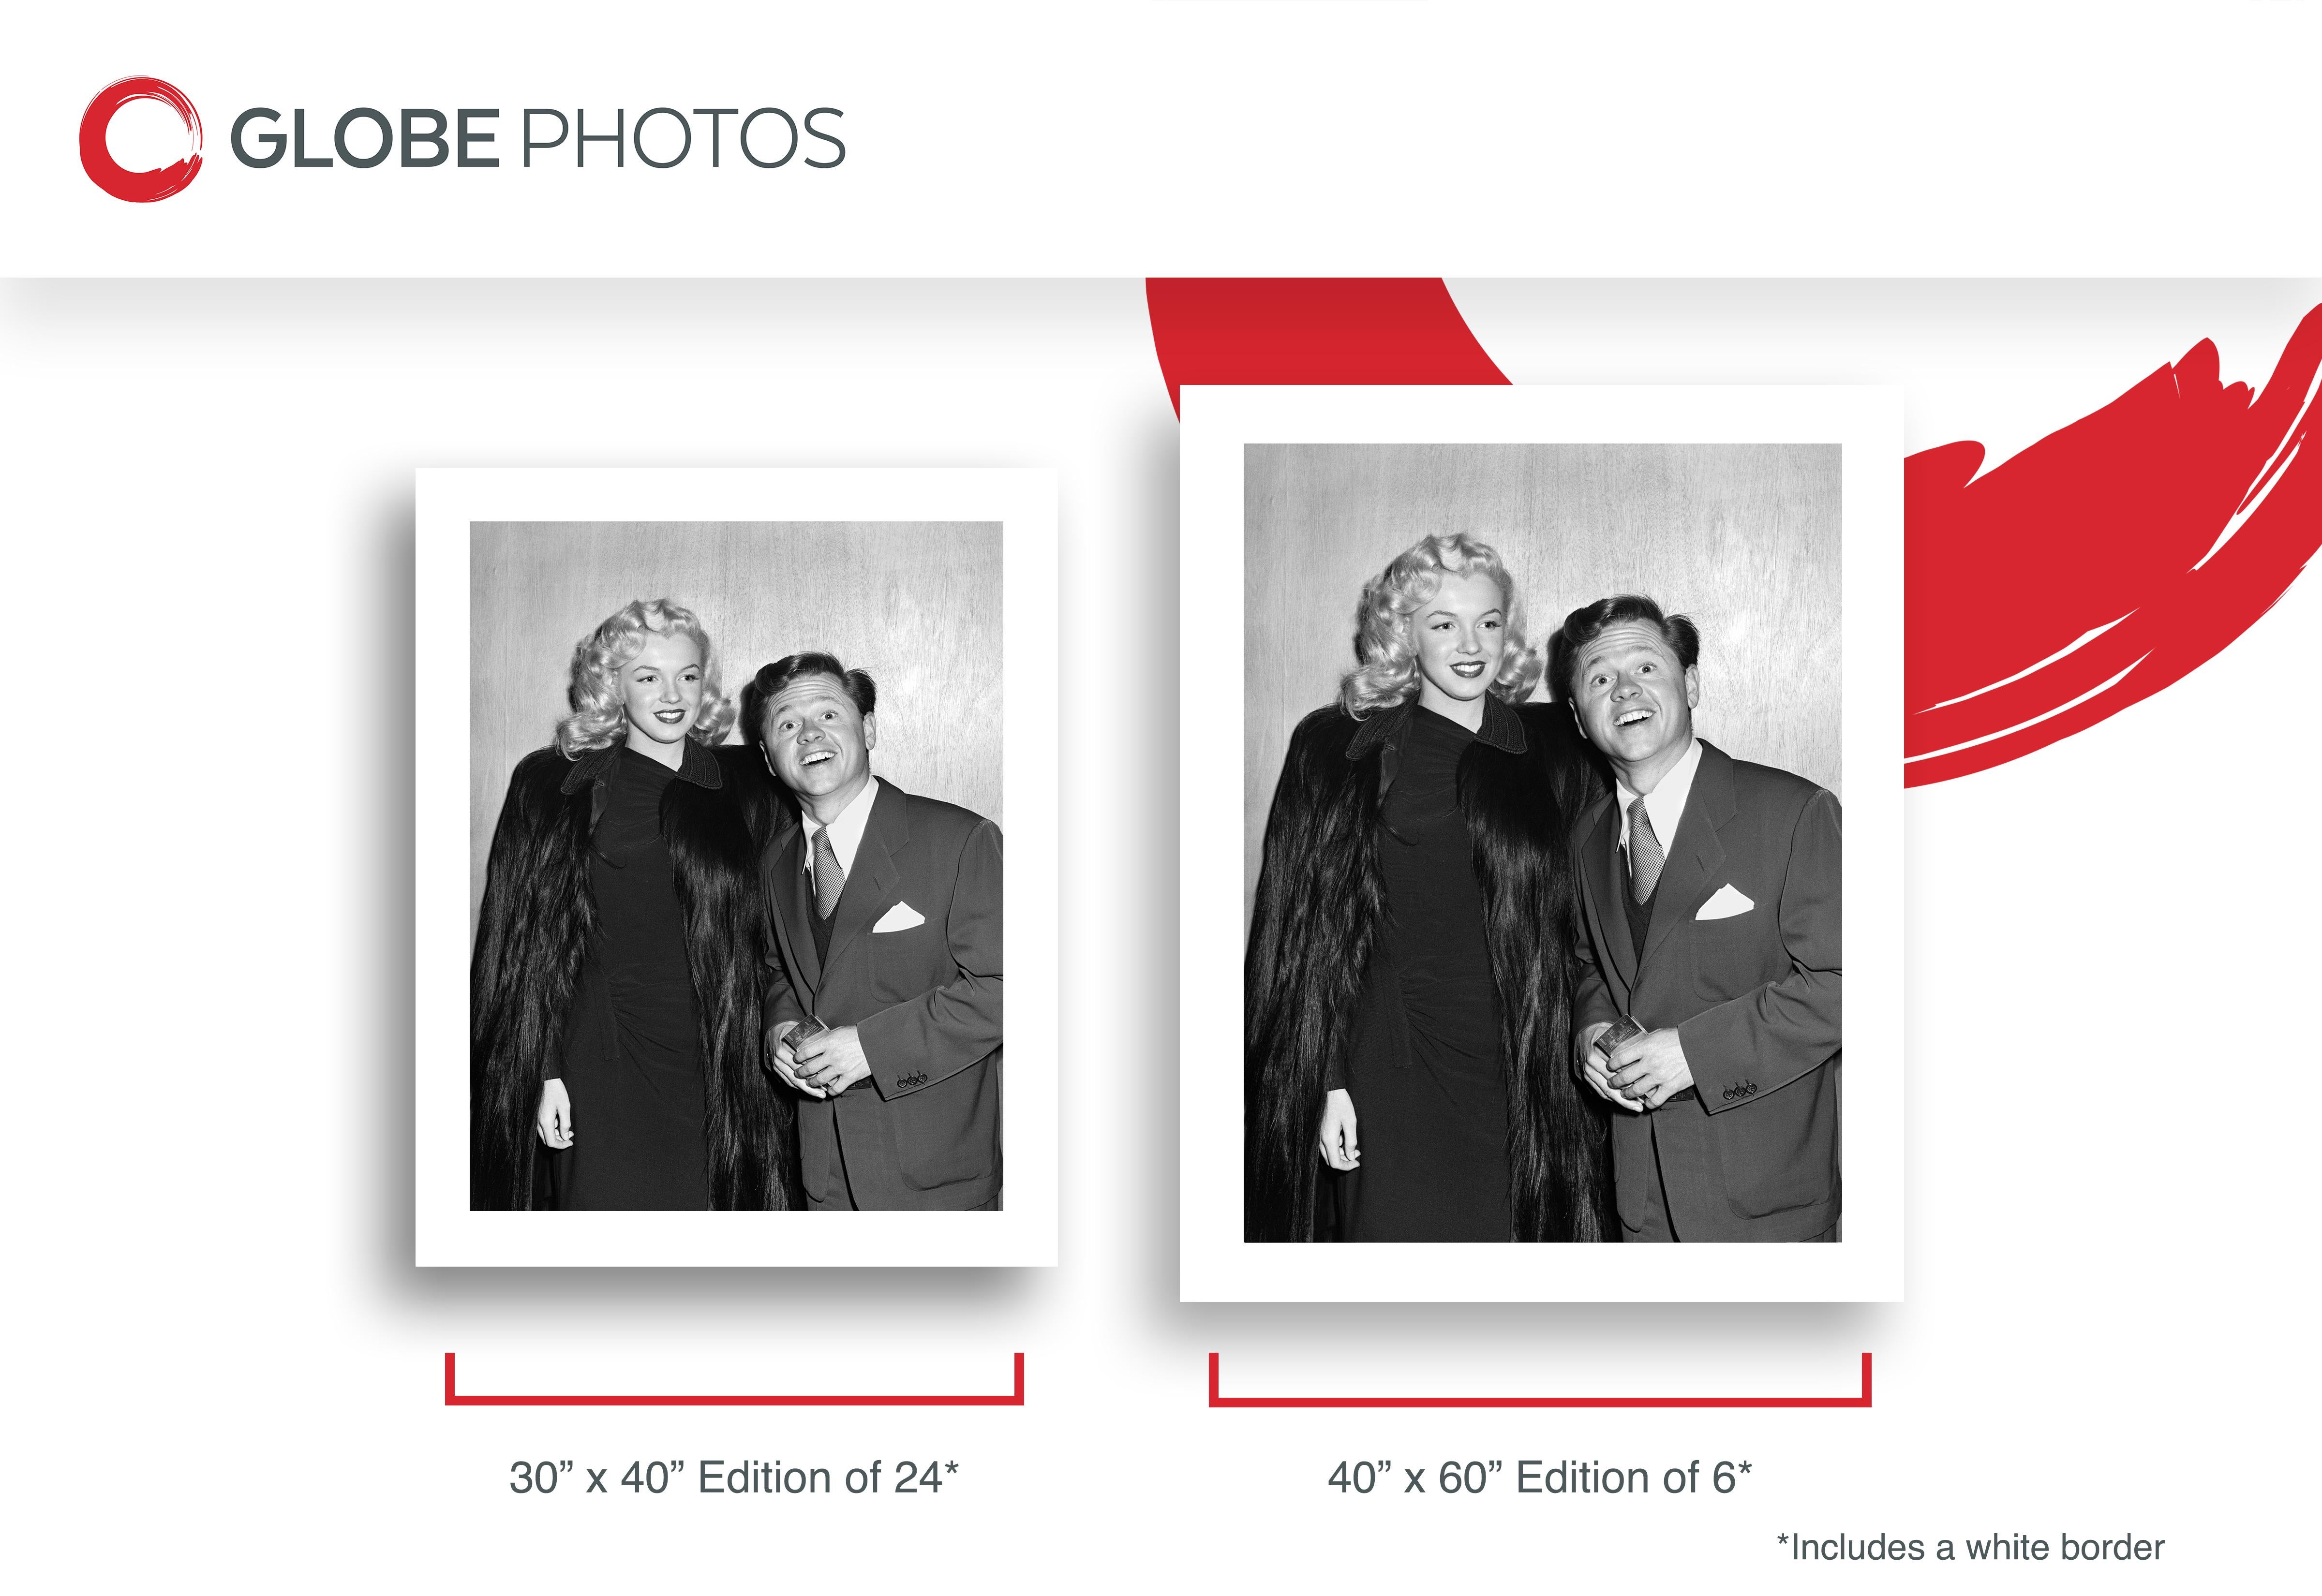 Marilyn Monroe & Mickey Rooney
 
This listing is for a limited edition archival print.

What's included:
- Limited Edition Archival Print
- Numbered Certificate of Authenticity

Sizes and Editions Available:
14